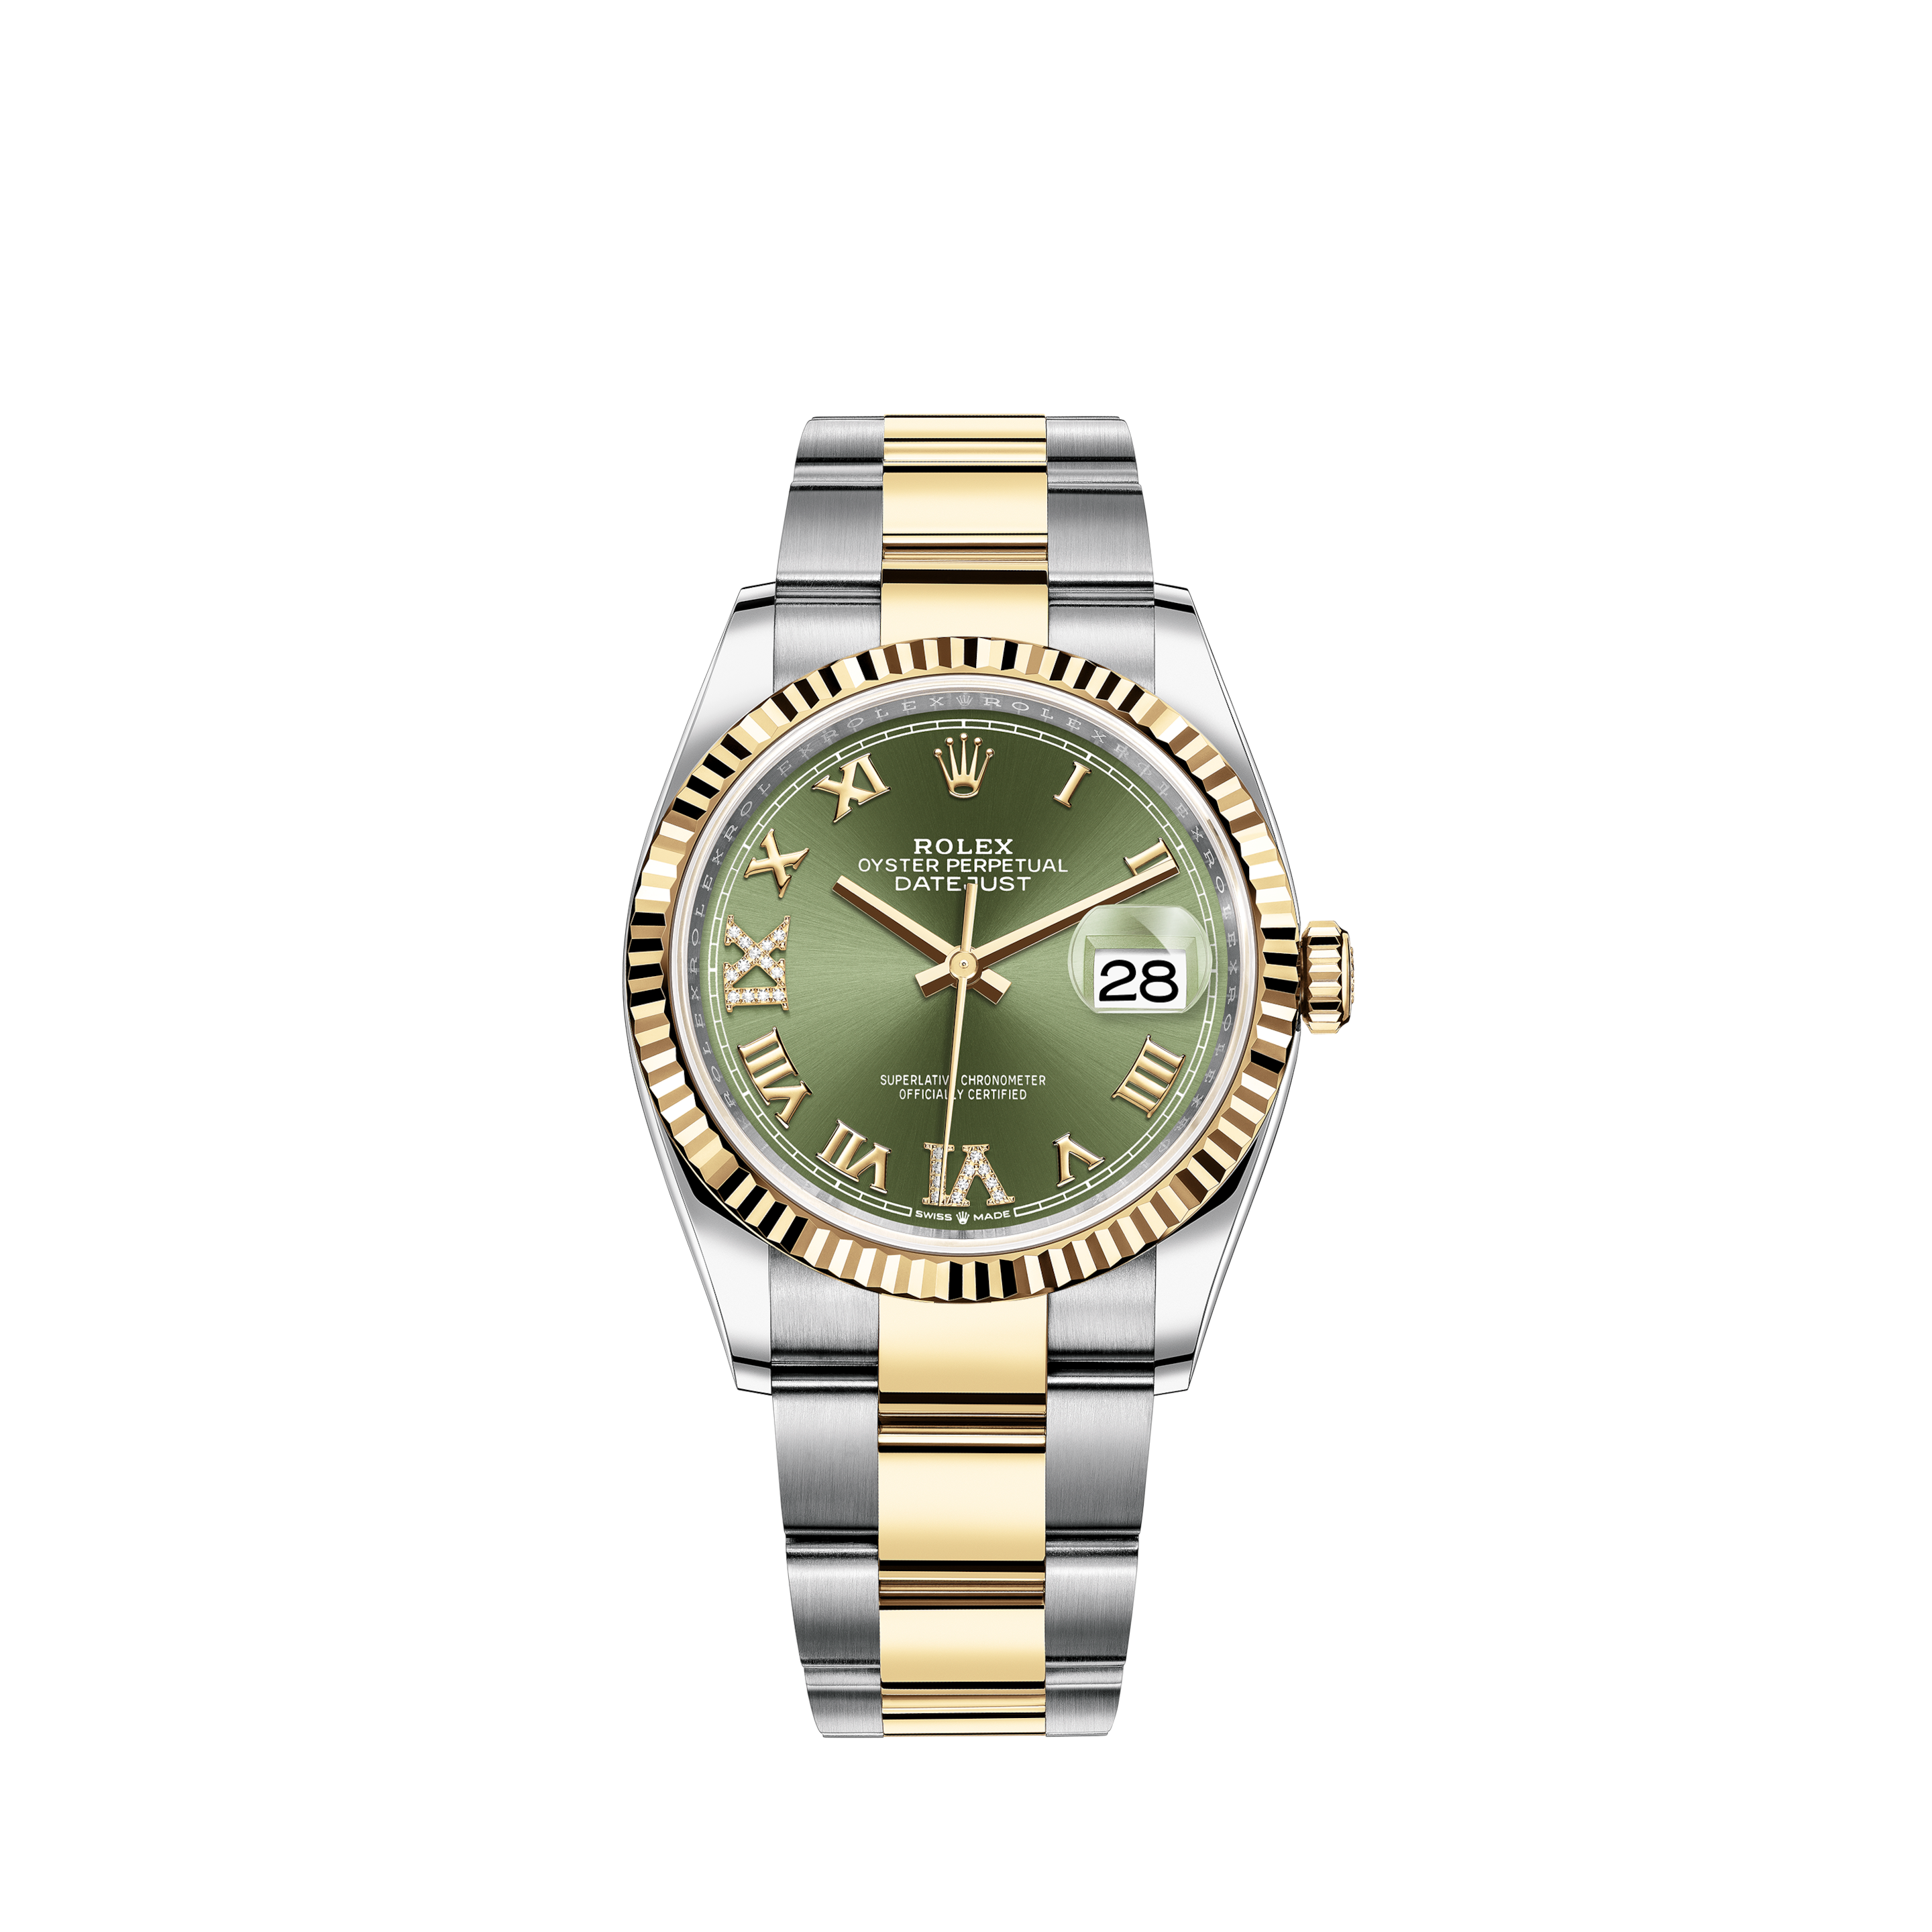 Rolex Oyster Perpetual Datejust Reference 16013 Gold & Steel - c.1978